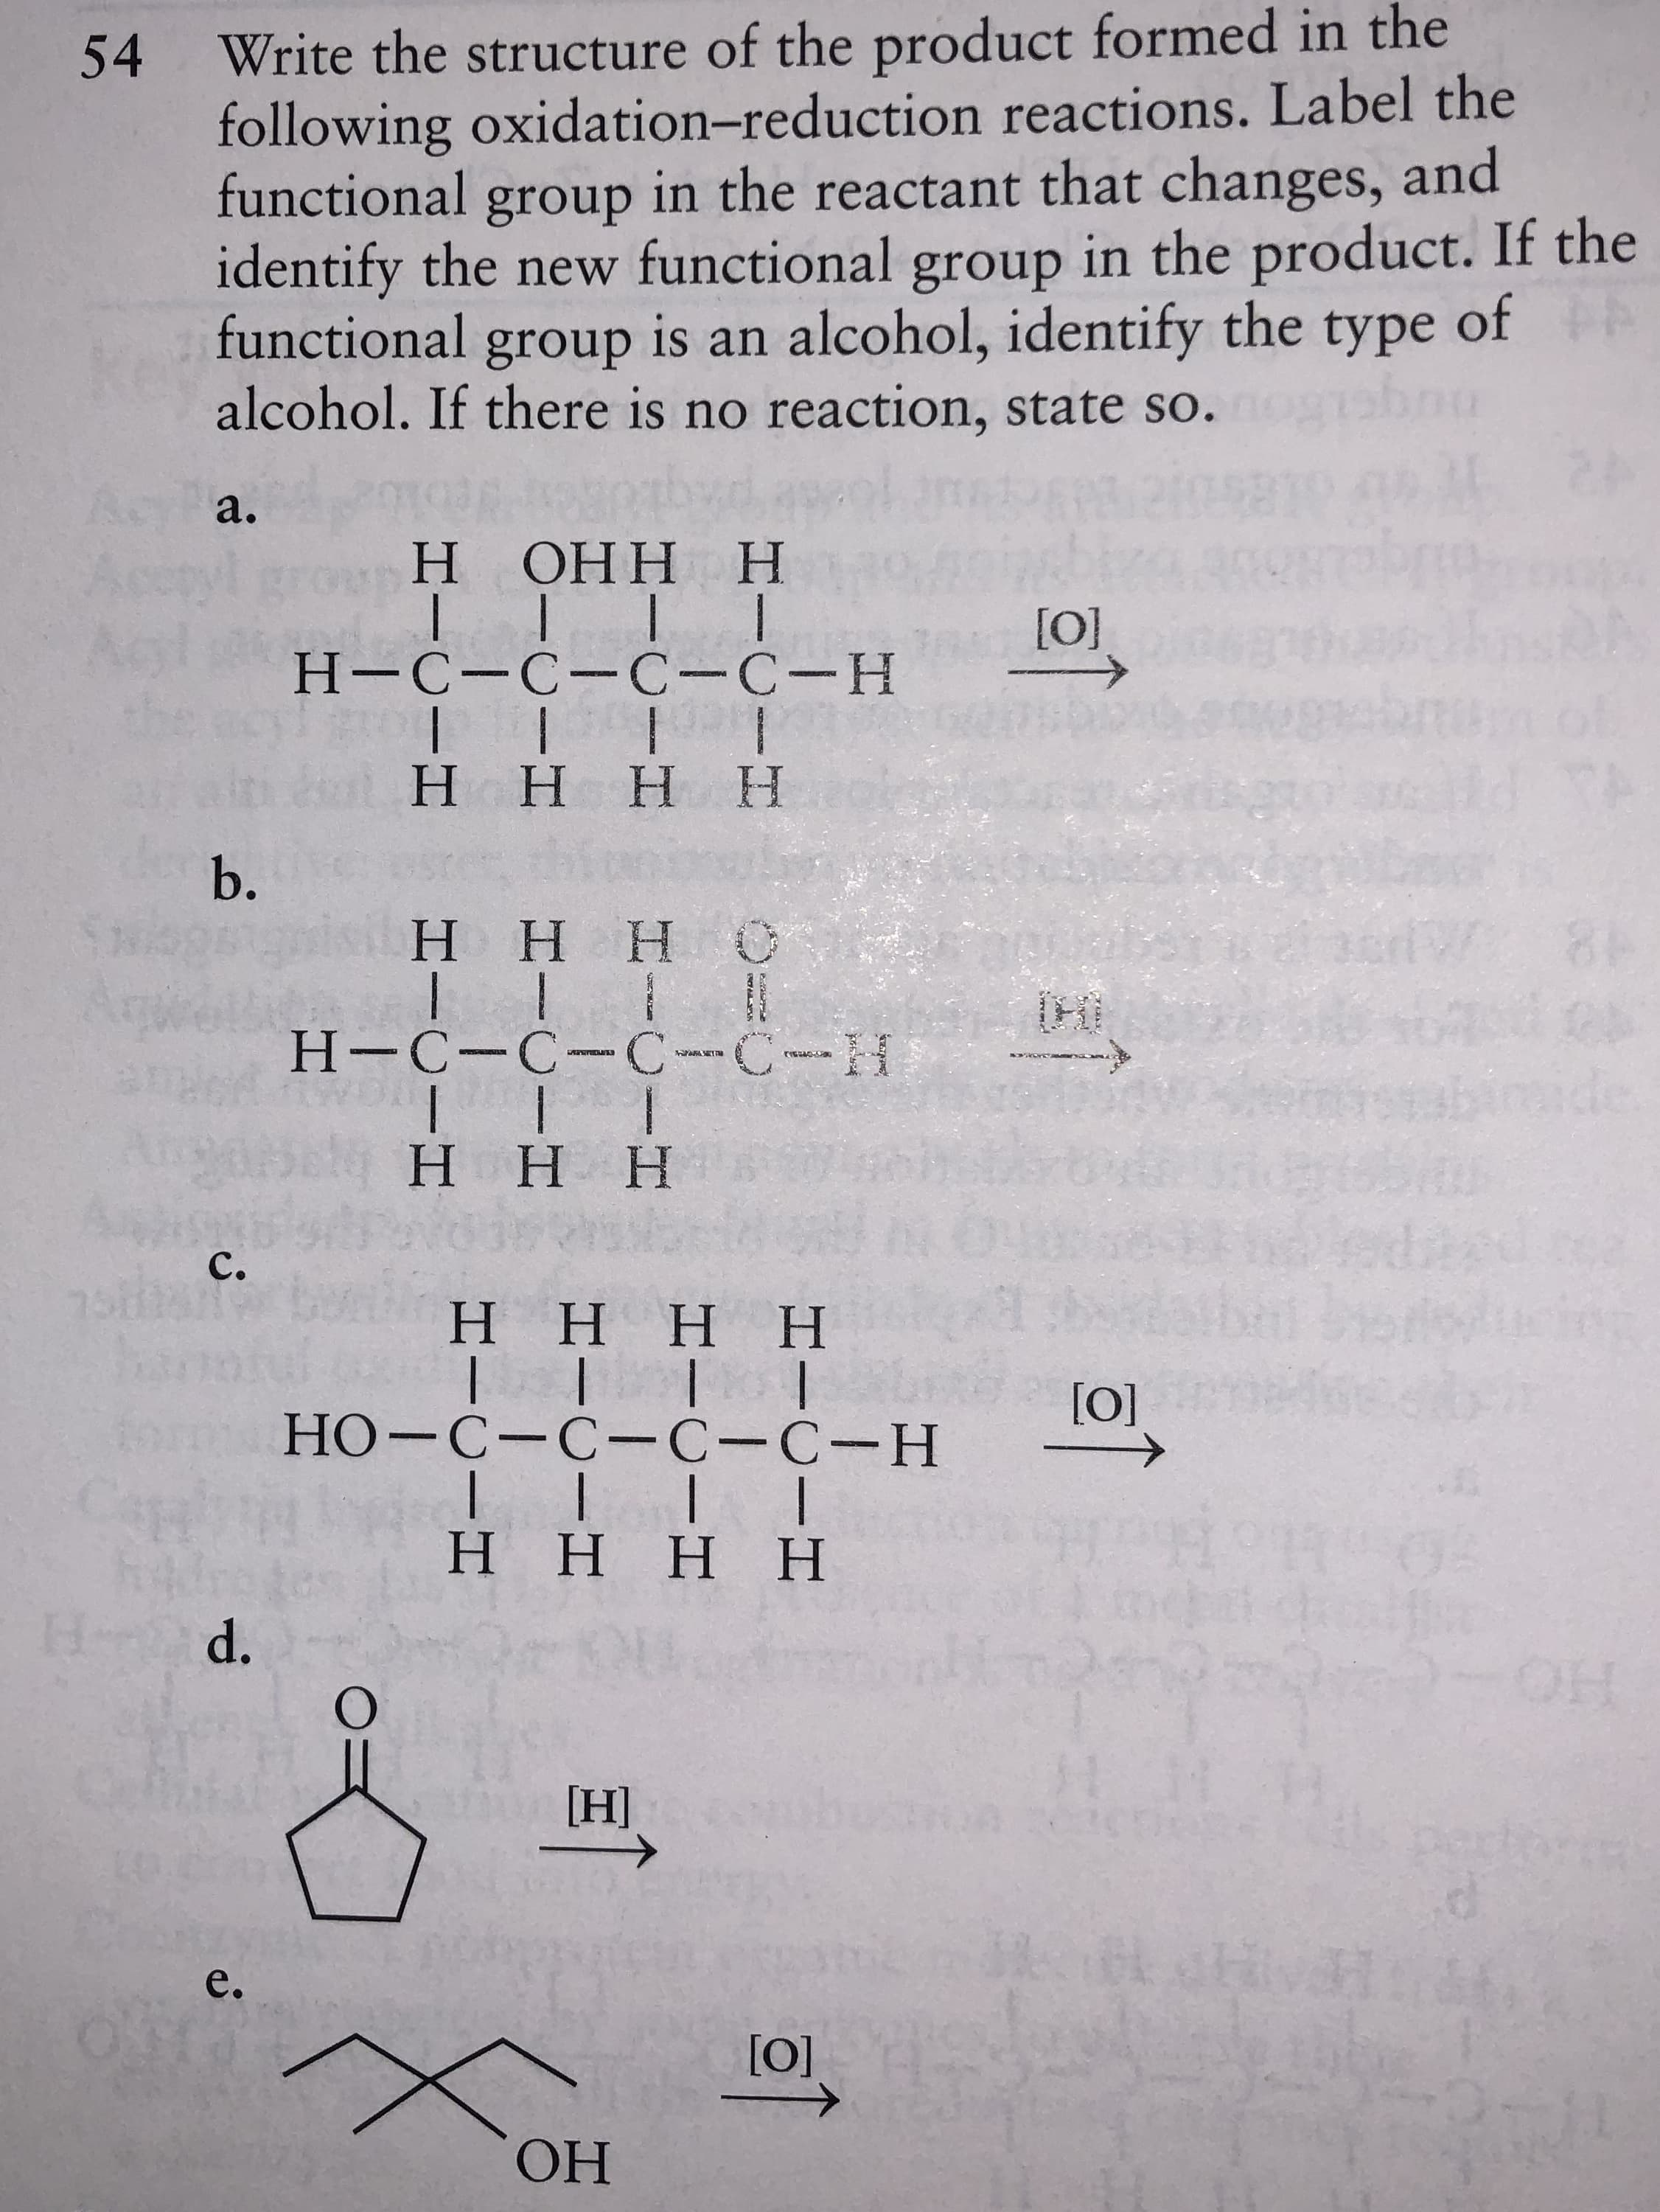 Write the structure of the product formed in the
following oxidation-reduction reactions. Label the
functional group in the reactant that changes, and
identify the new functional group in the product. If the
functional group is an alcohol, identify the type of
alcohol. If there is no reaction, state so.
54
Ac
a.
H.
ОНН Н
[O]
Н-С-С—С-С-Н
of
H.
ННН
b.
НННС
84
Н-С-С-С--С--Н
ННН
C.
НННН
[0]
form
НО-С-С-С-С-Н
H HH H
Hd.
HO
[H]
pertortm
e.
[0]
ОН
কন
